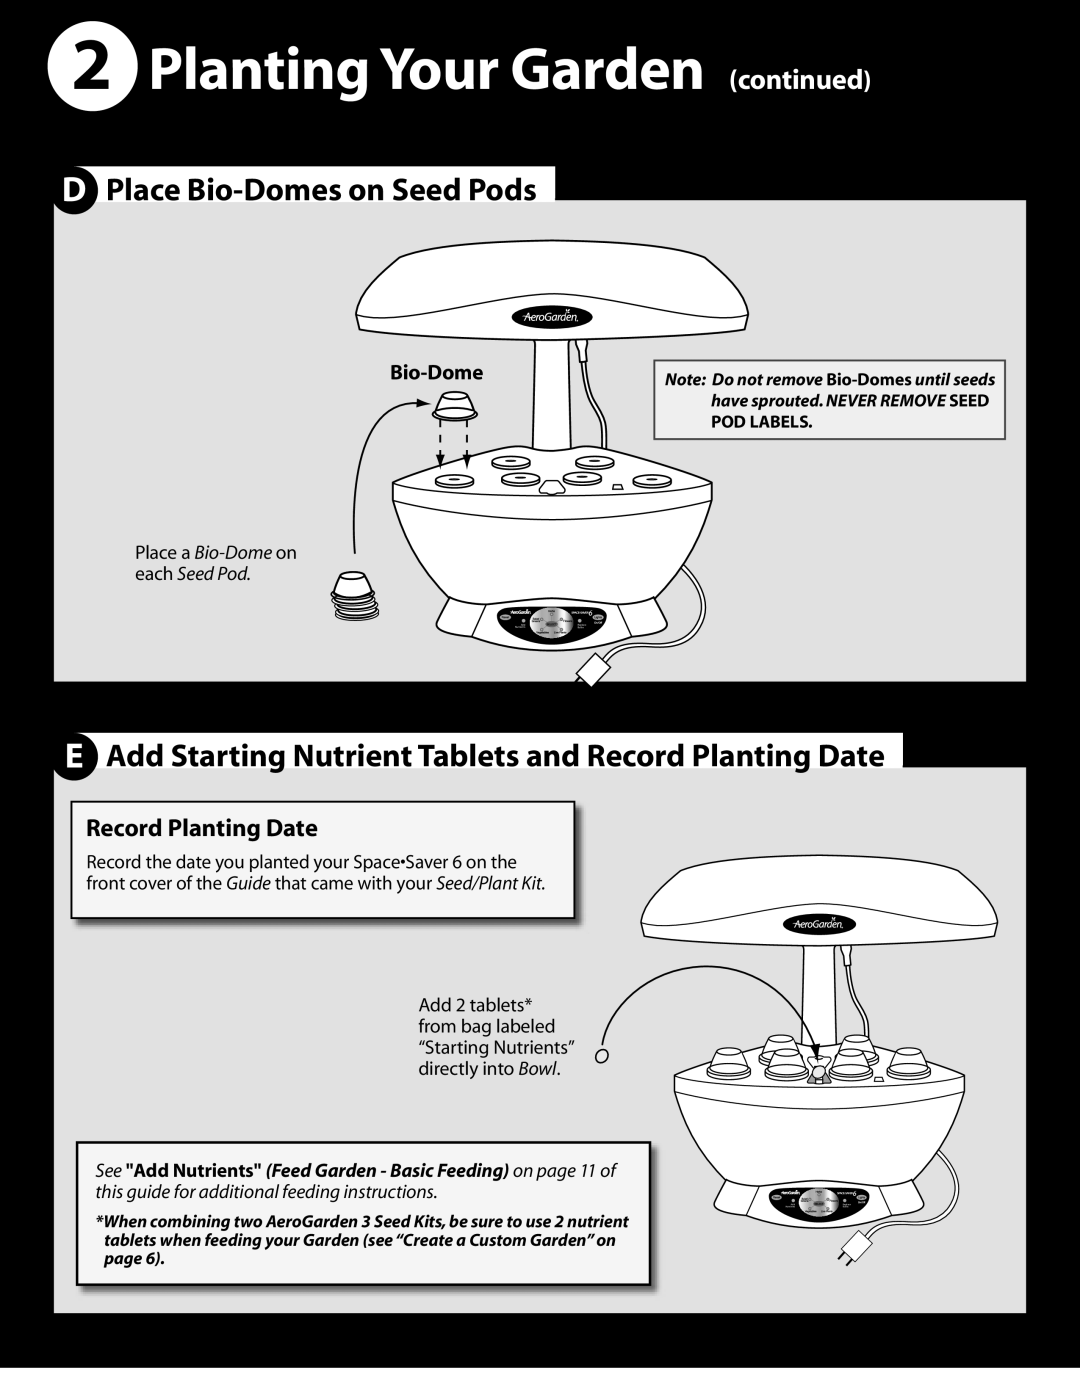 AeroGarden 100603-BSS, 200340, 100340 Planting Your Garden continued, DPlace Bio-Domeson Seed Pods, Record Planting Date 